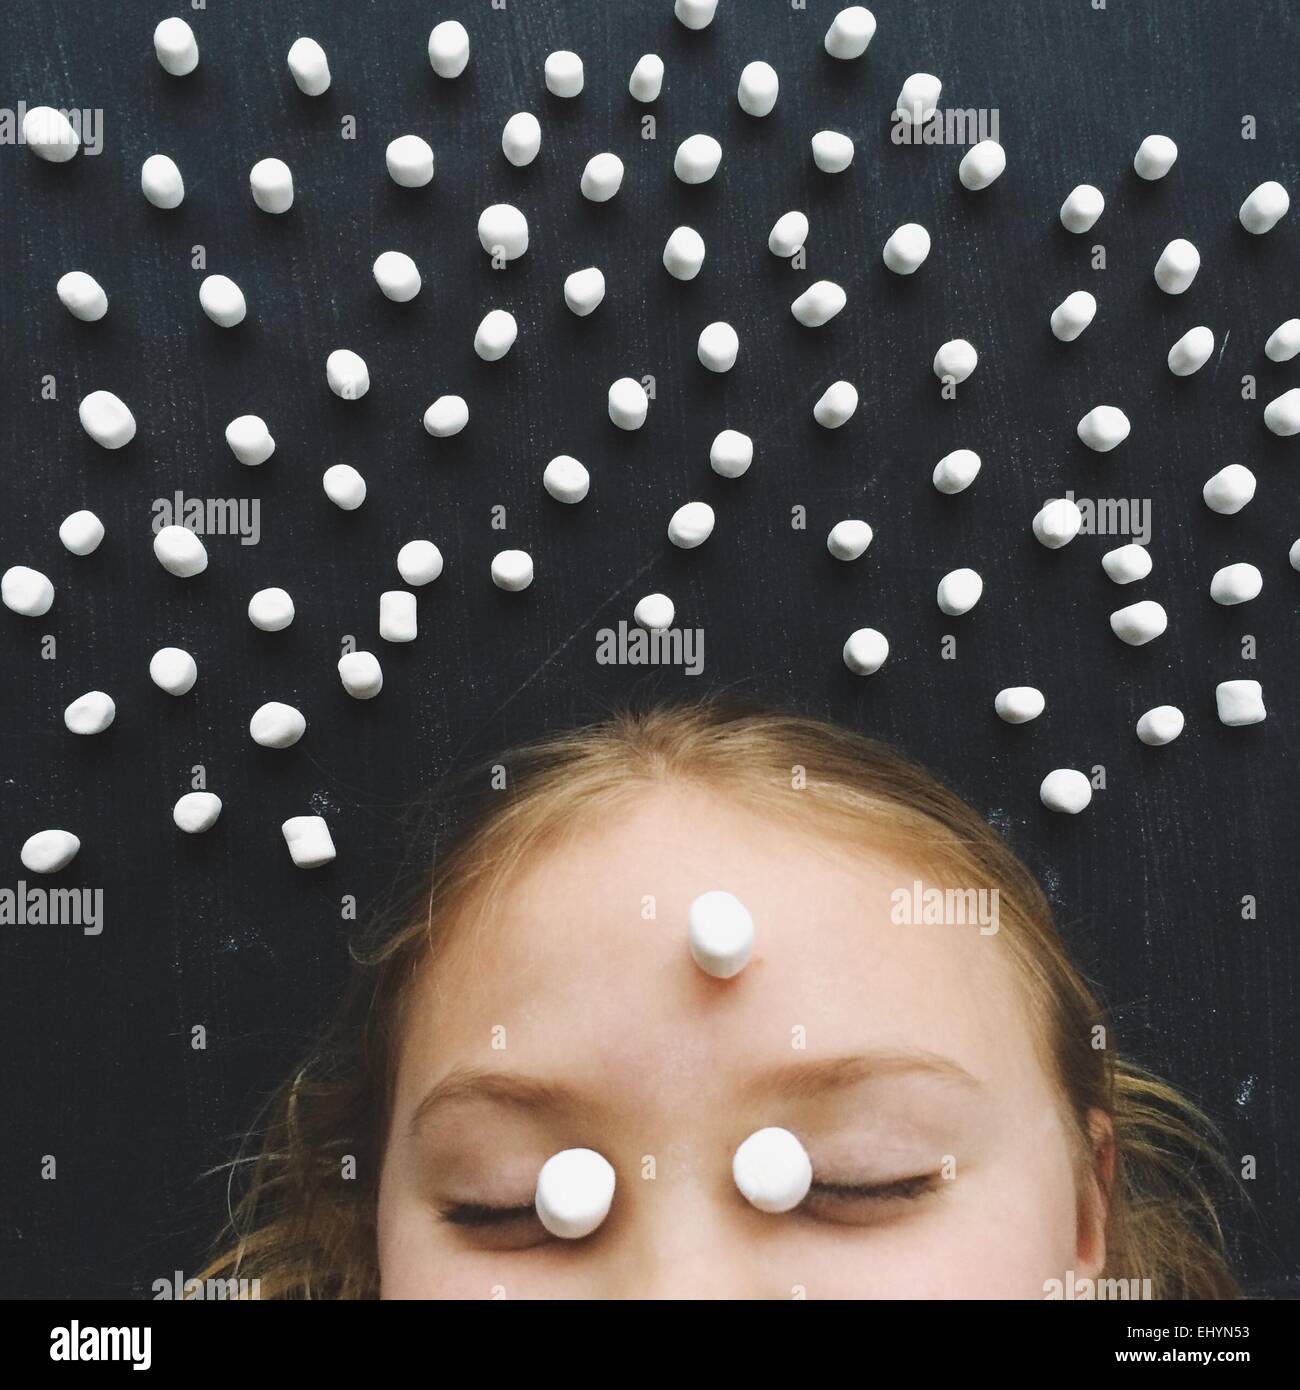 Girl with her eyes closed surrounded by marshmallows Stock Photo